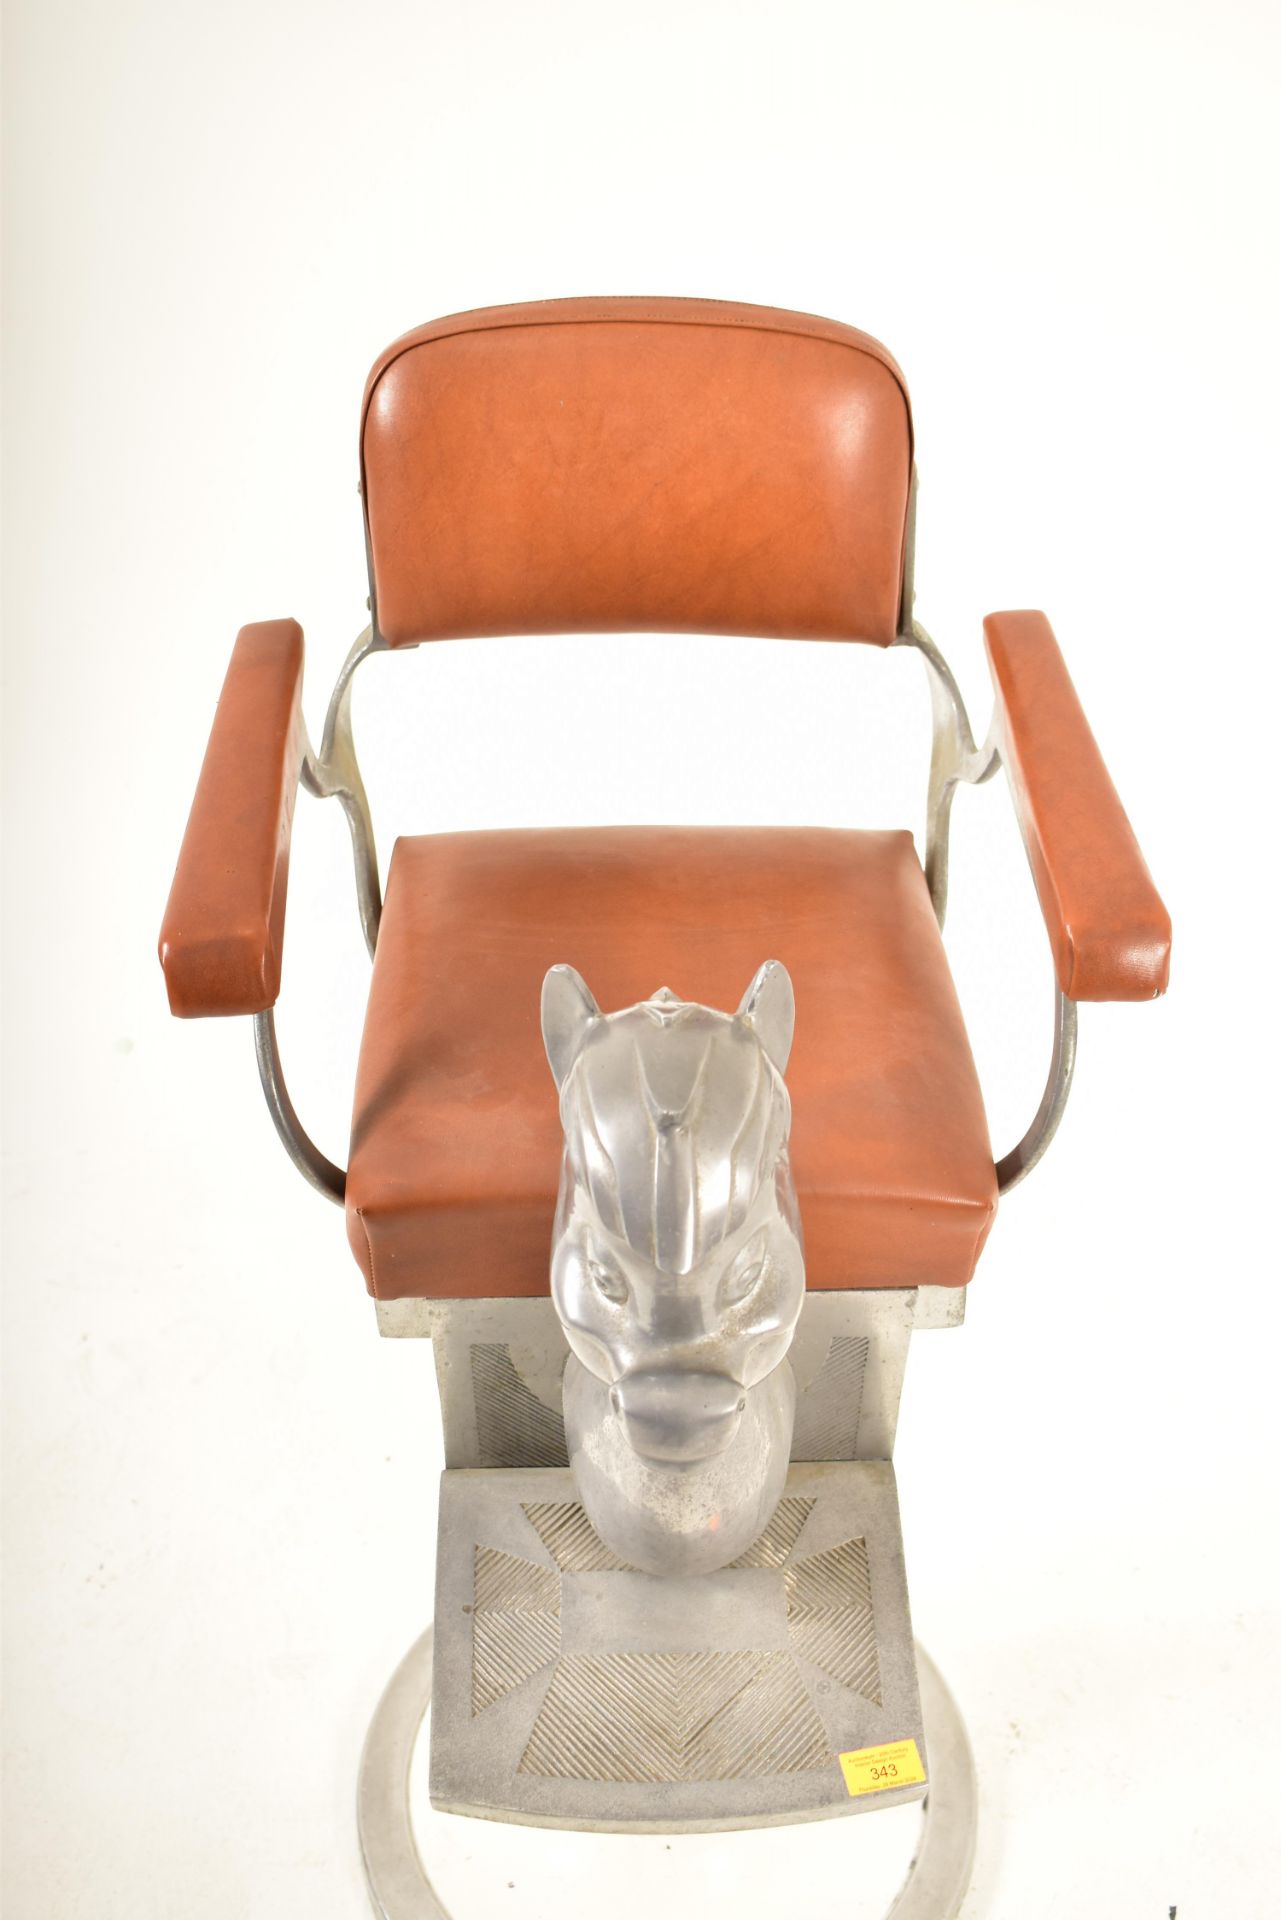 MID CENTURY 1950S CHILDREN'S BARBER SHOP CHAIR - Image 5 of 7